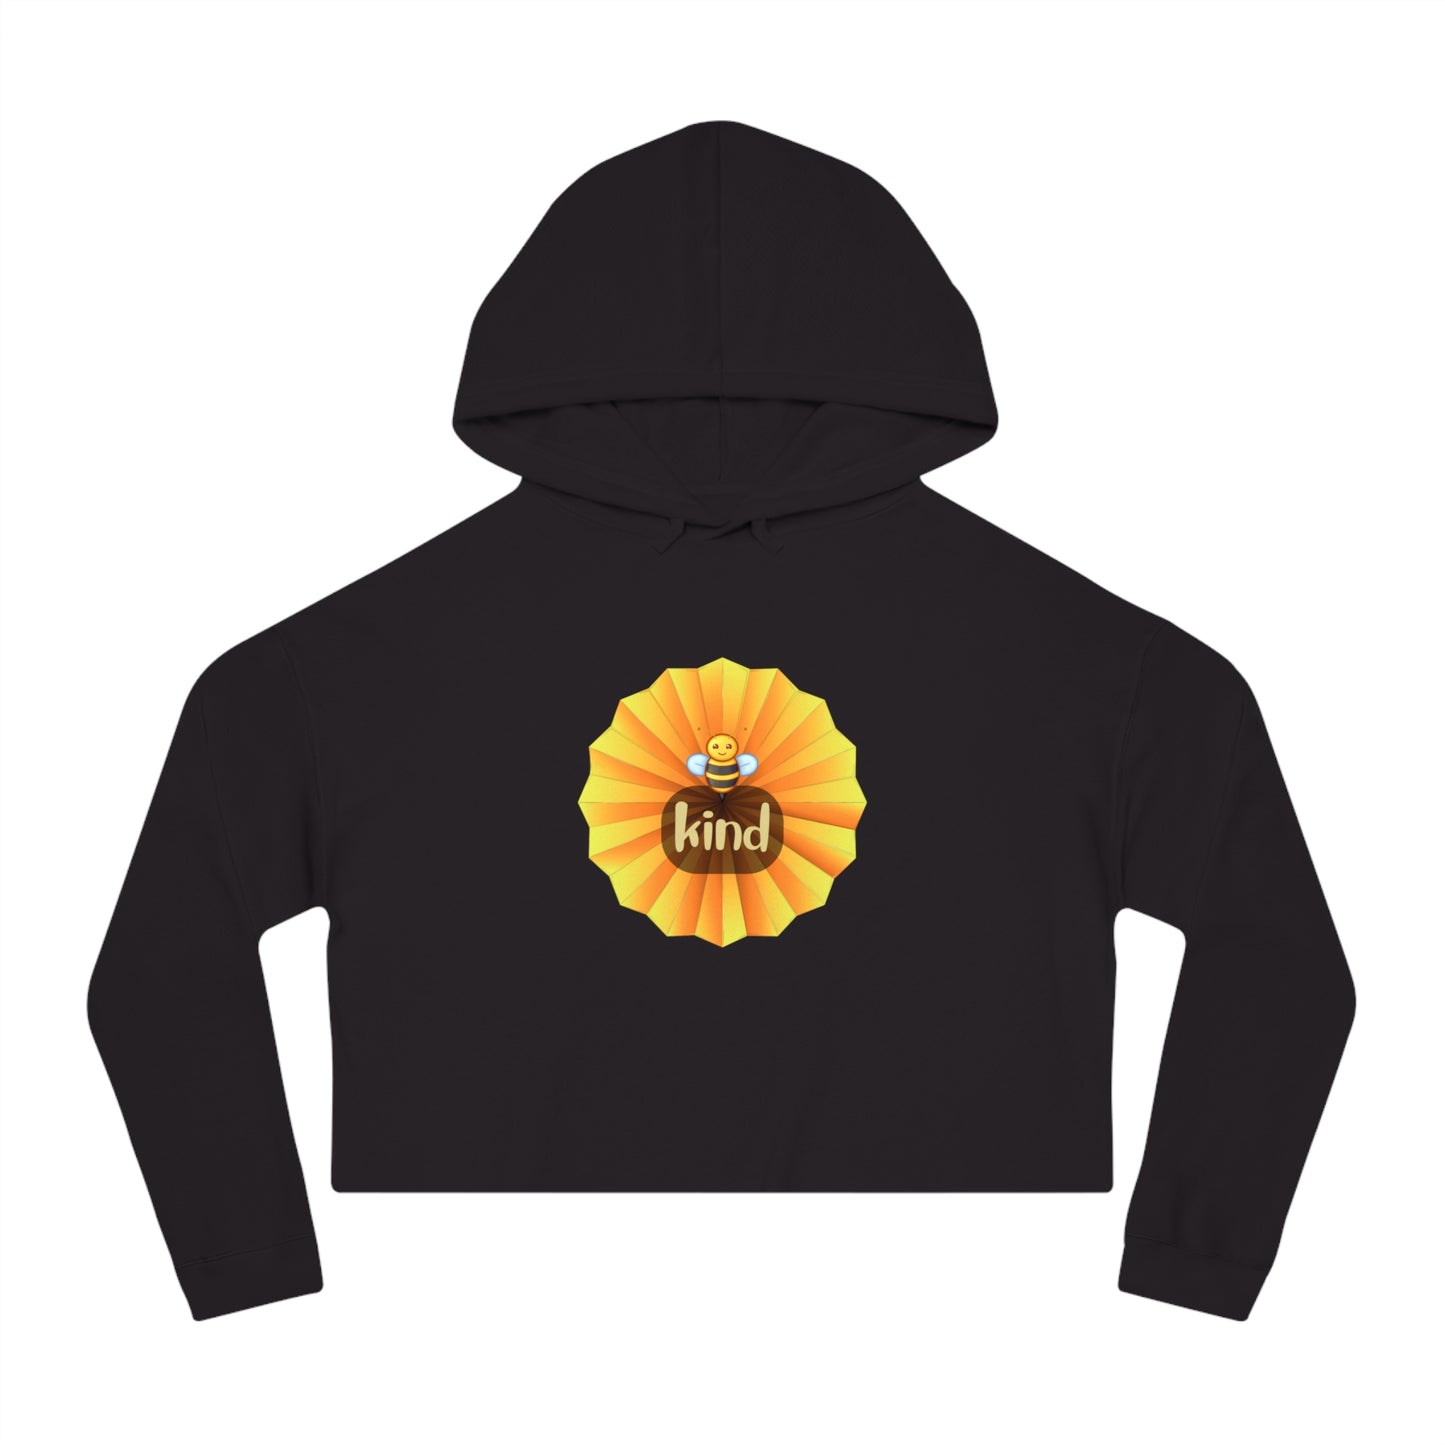 Be (bee picture) kind message in the middle of a yellow origami flower design on this stylish Women’s Cropped Hooded Sweatshirt for your enjoyment.